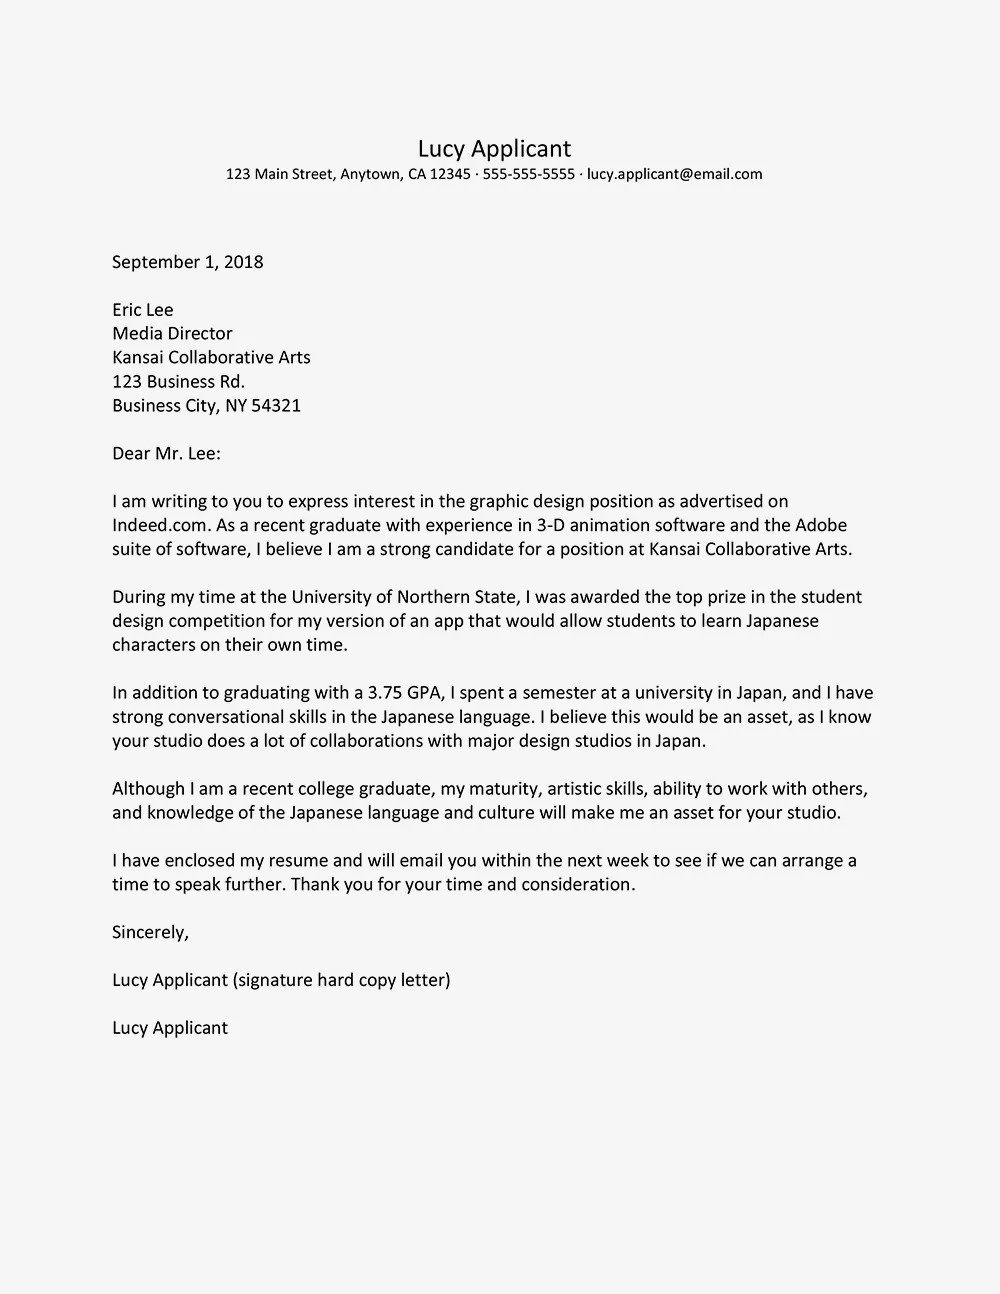 College Graduate Cover Letter from glints.com